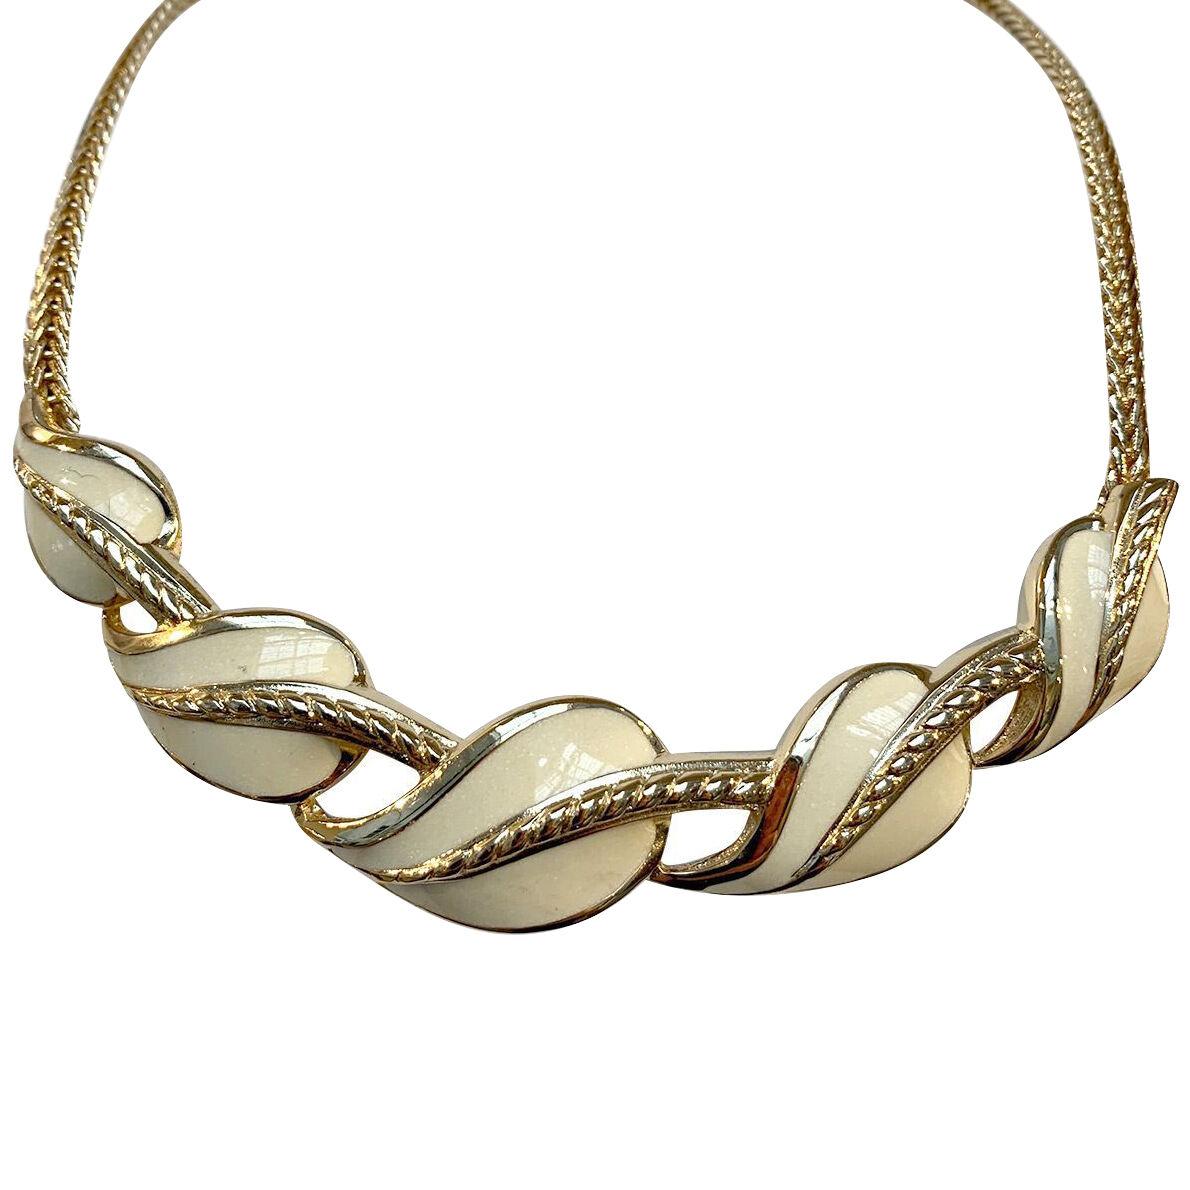 Grosse for Christian Dior 1980s Cream Enamel Leaves and Gold Plated Necklace